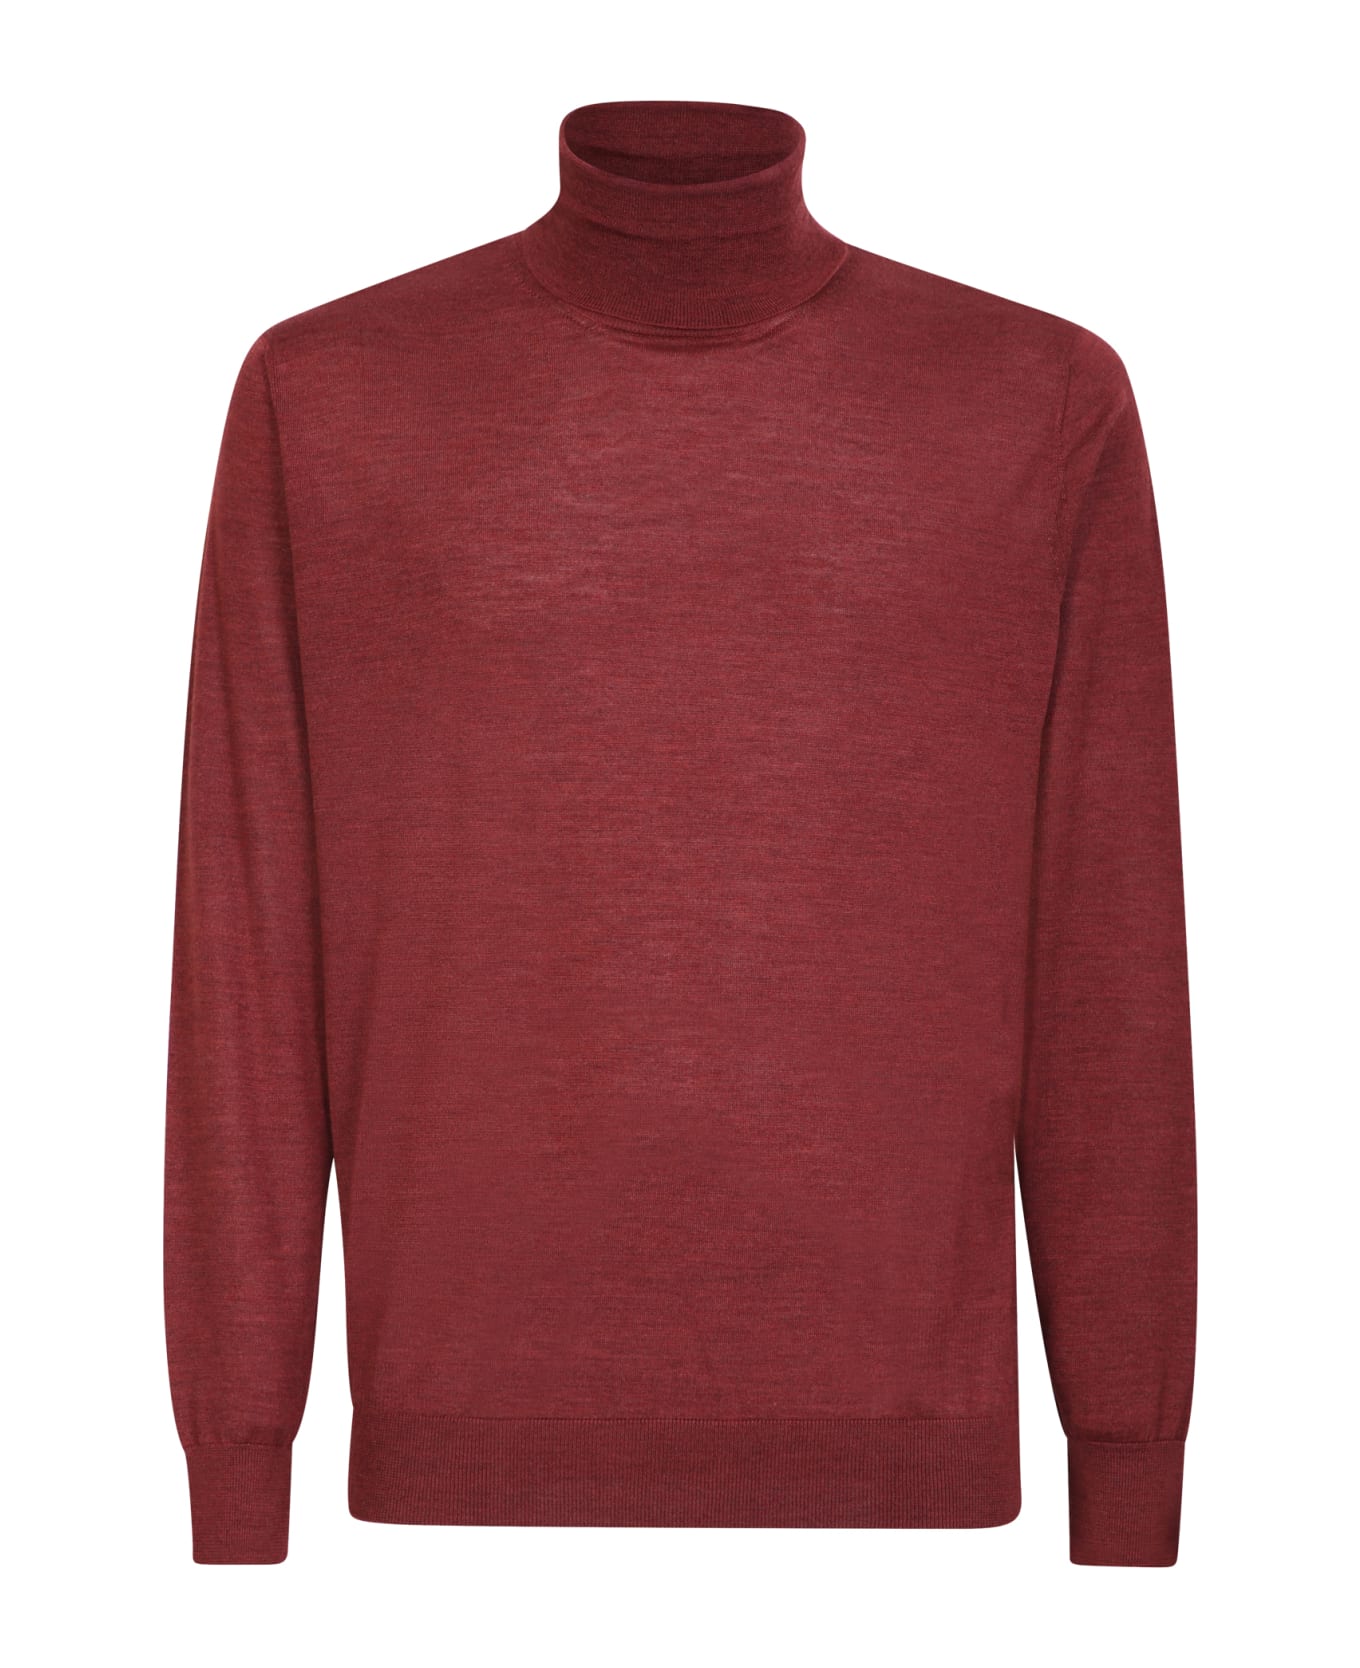 Colombo Silk And Cashmere Sweater - Bordeaux